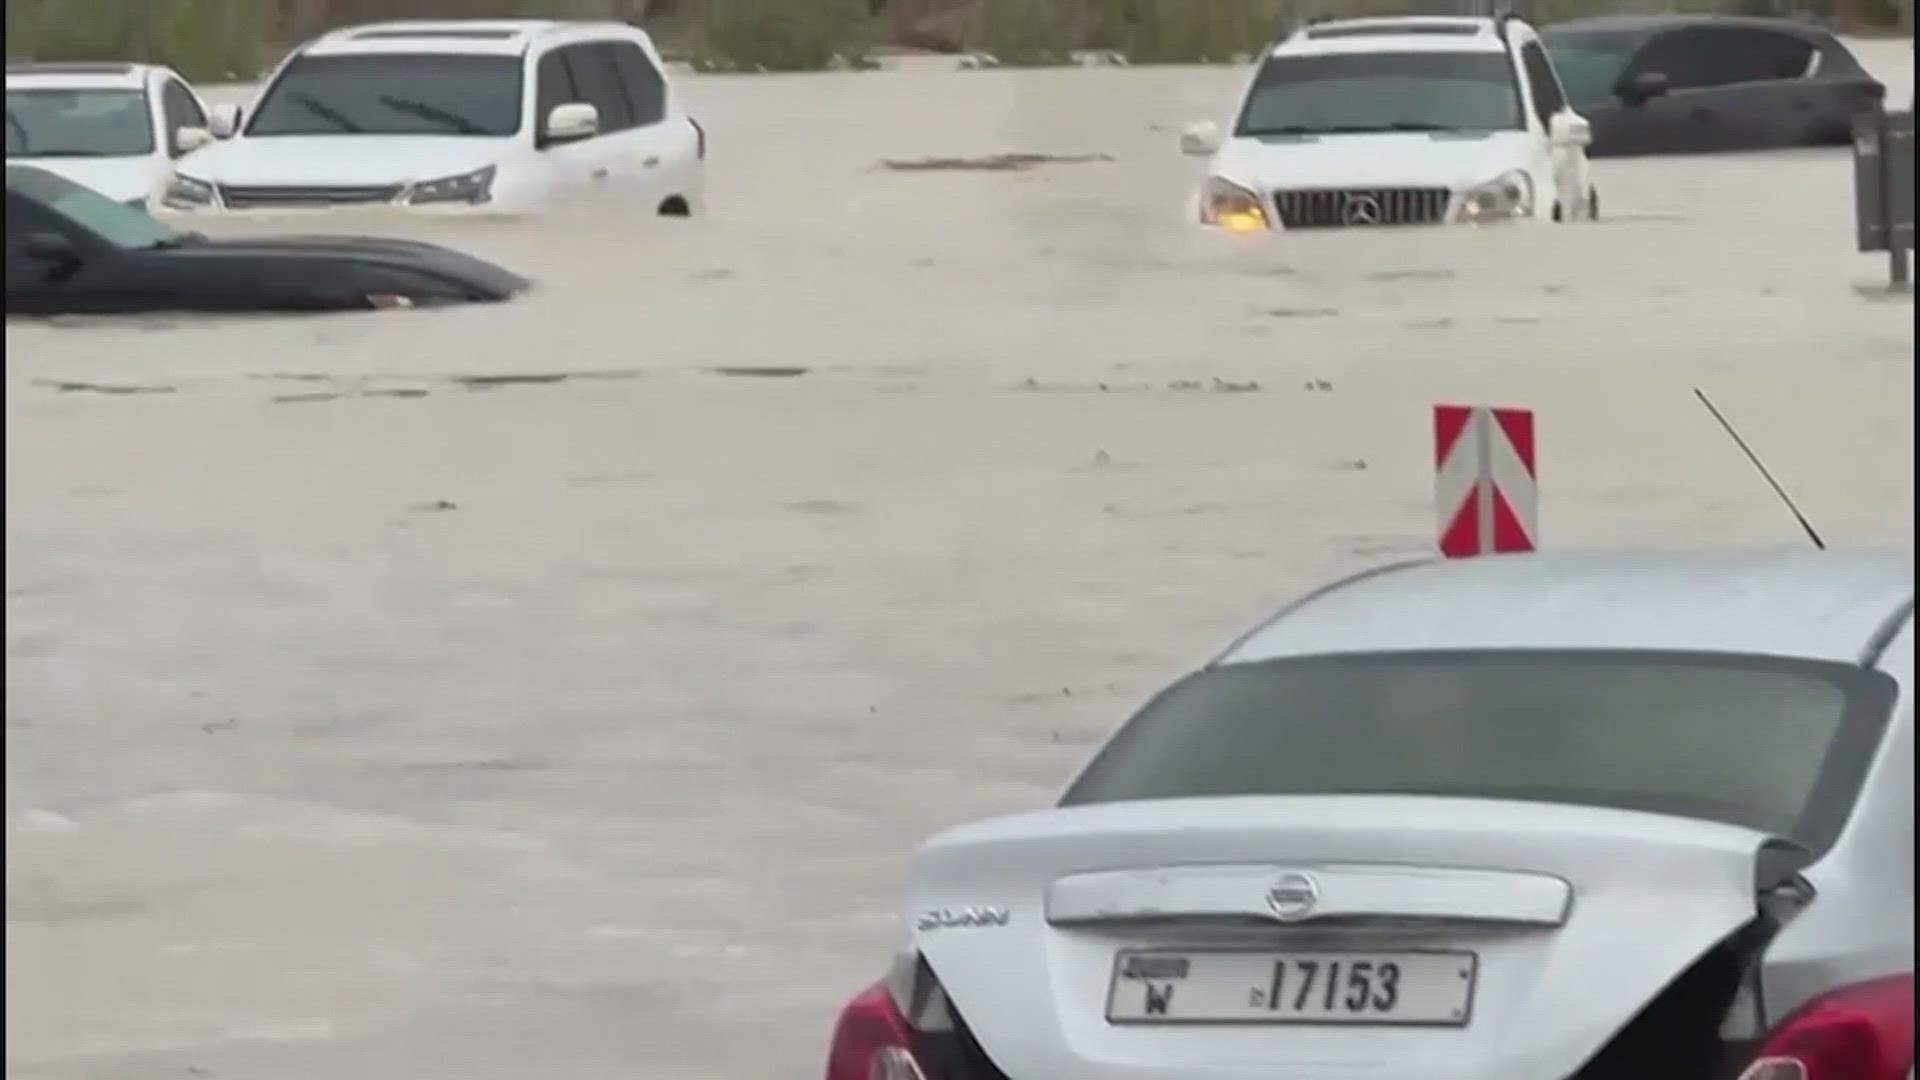 Rainfall totals at Dubai International Airport totaled 99 mm (3.9 inches) in a span of just 12 hours, according to weather observations at the airport.